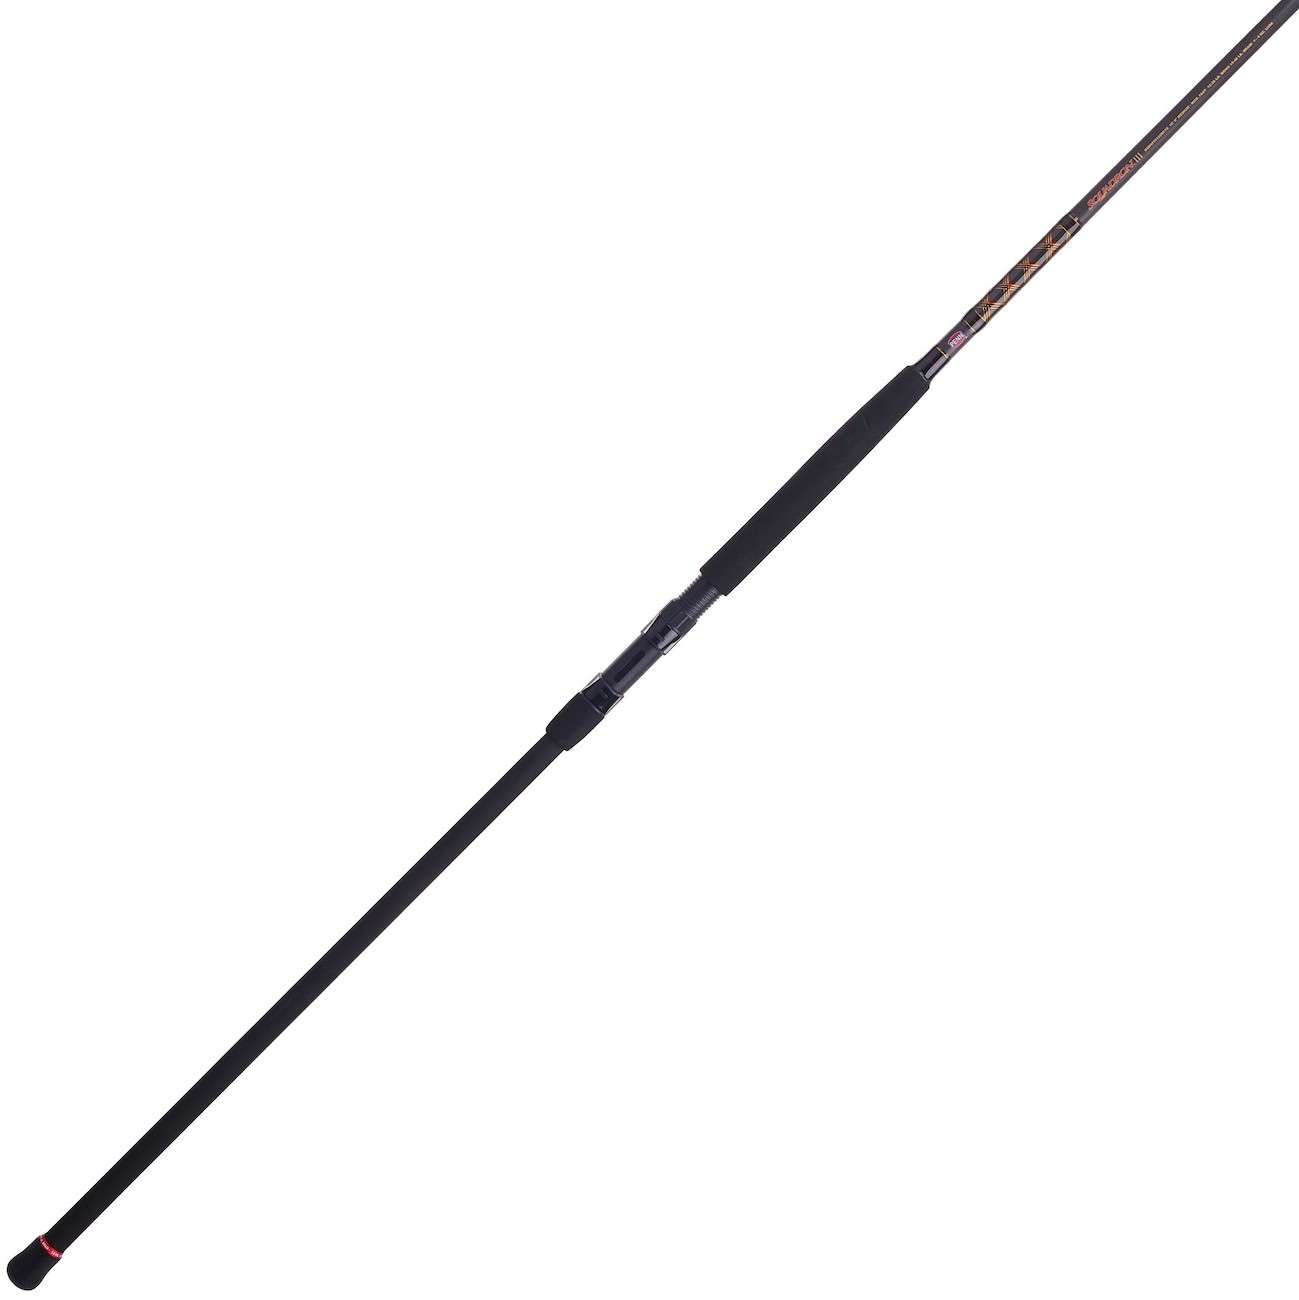 STAR RODS HANDCRAFTED STAND-UP CONVENTIONAL ROD, Star Rods